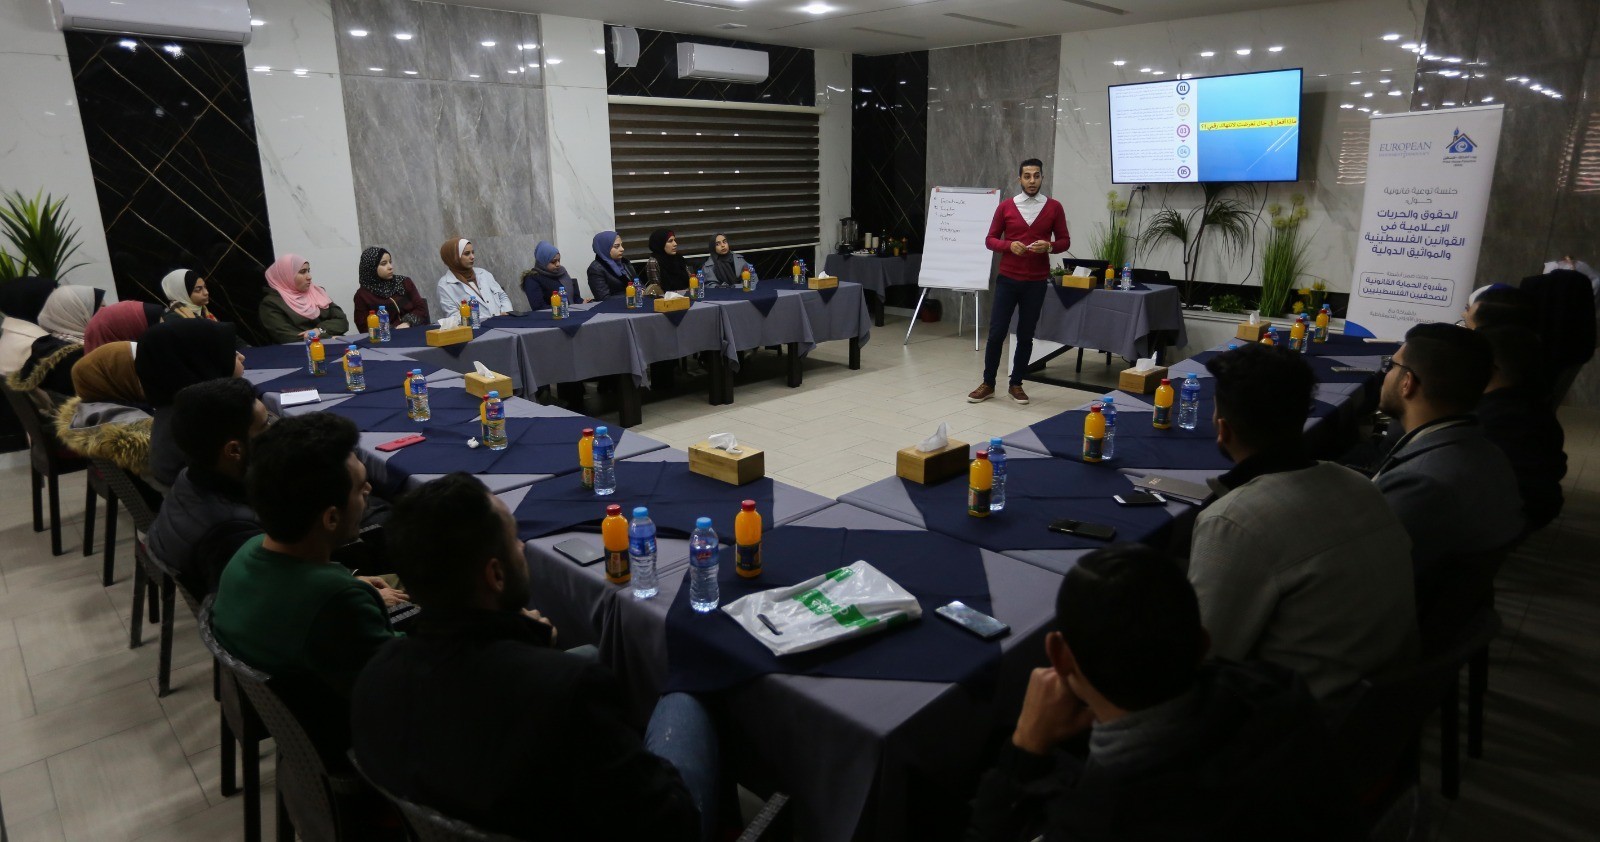 Press House holds a legal awareness session entitled "Digital Protection for Journalists"